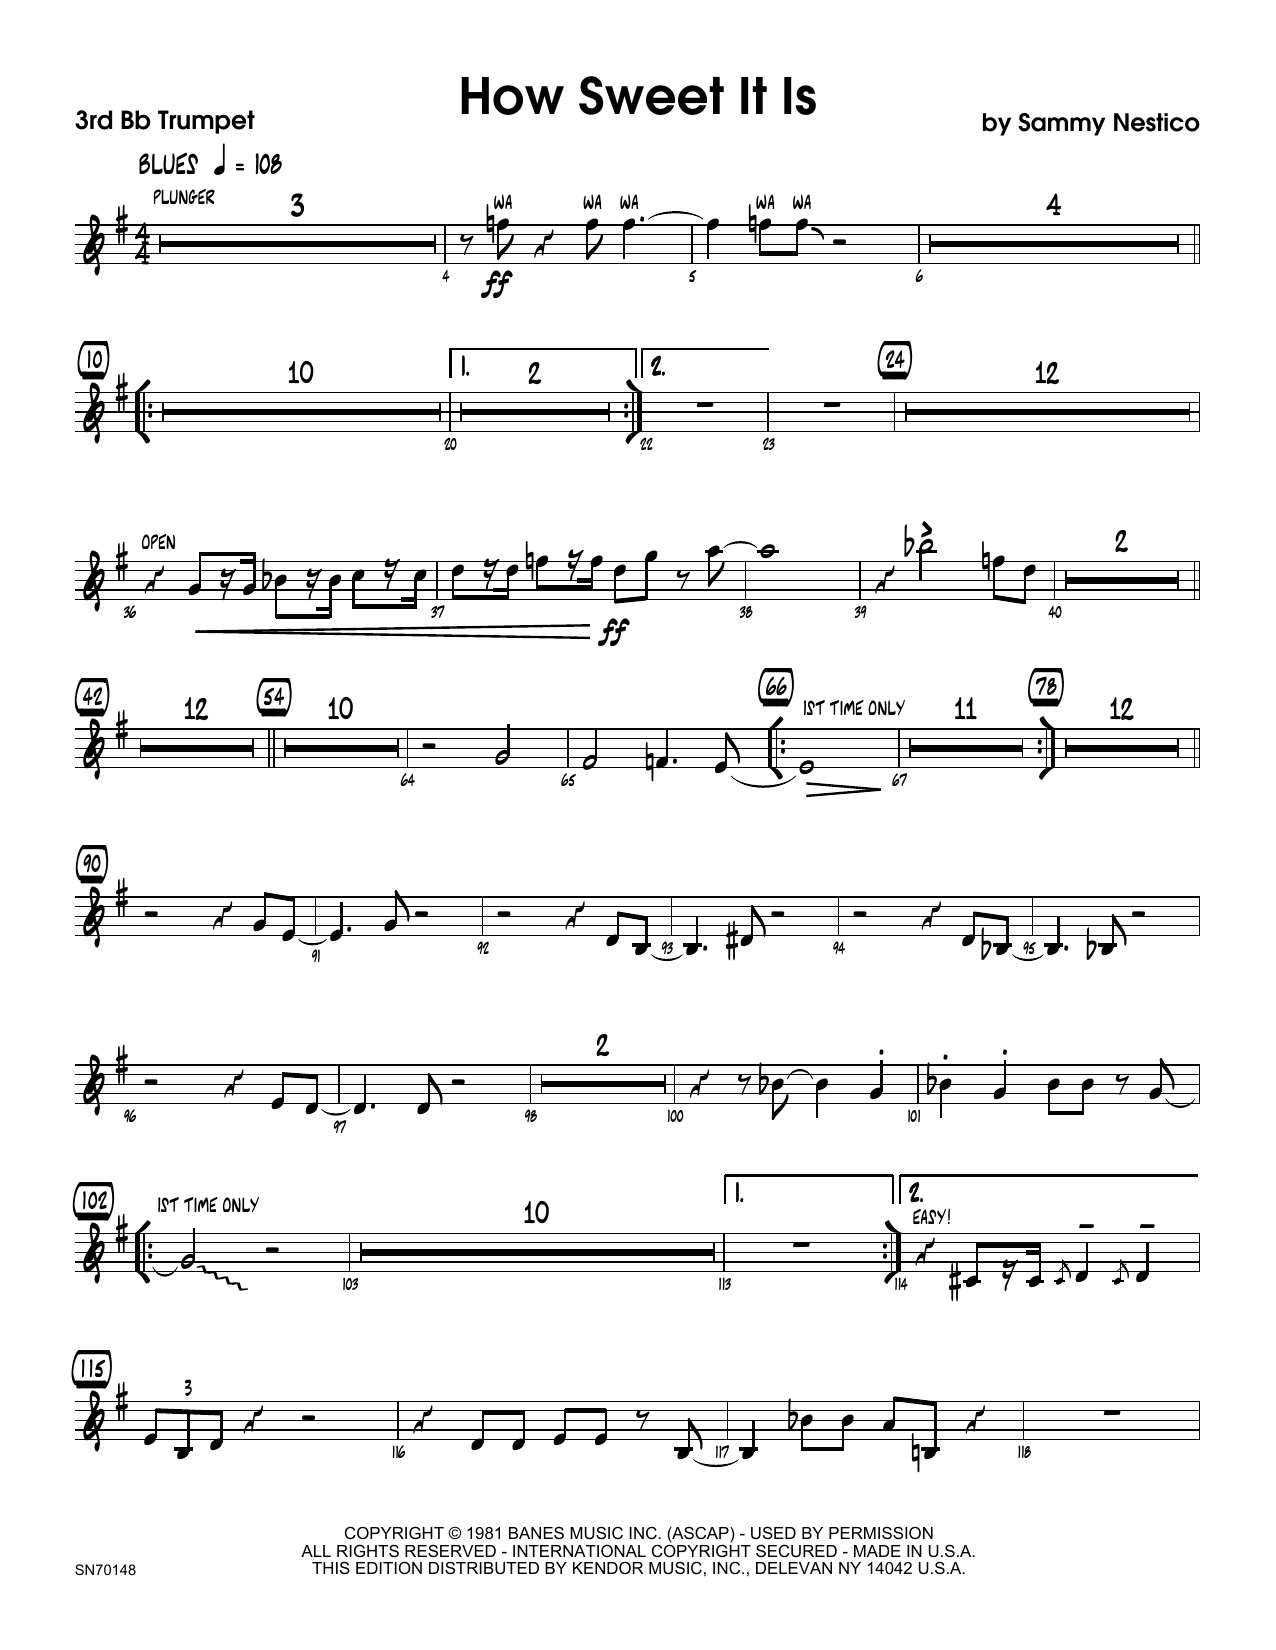 Download Sammy Nestico How Sweet It Is - 3rd Bb Trumpet Sheet Music